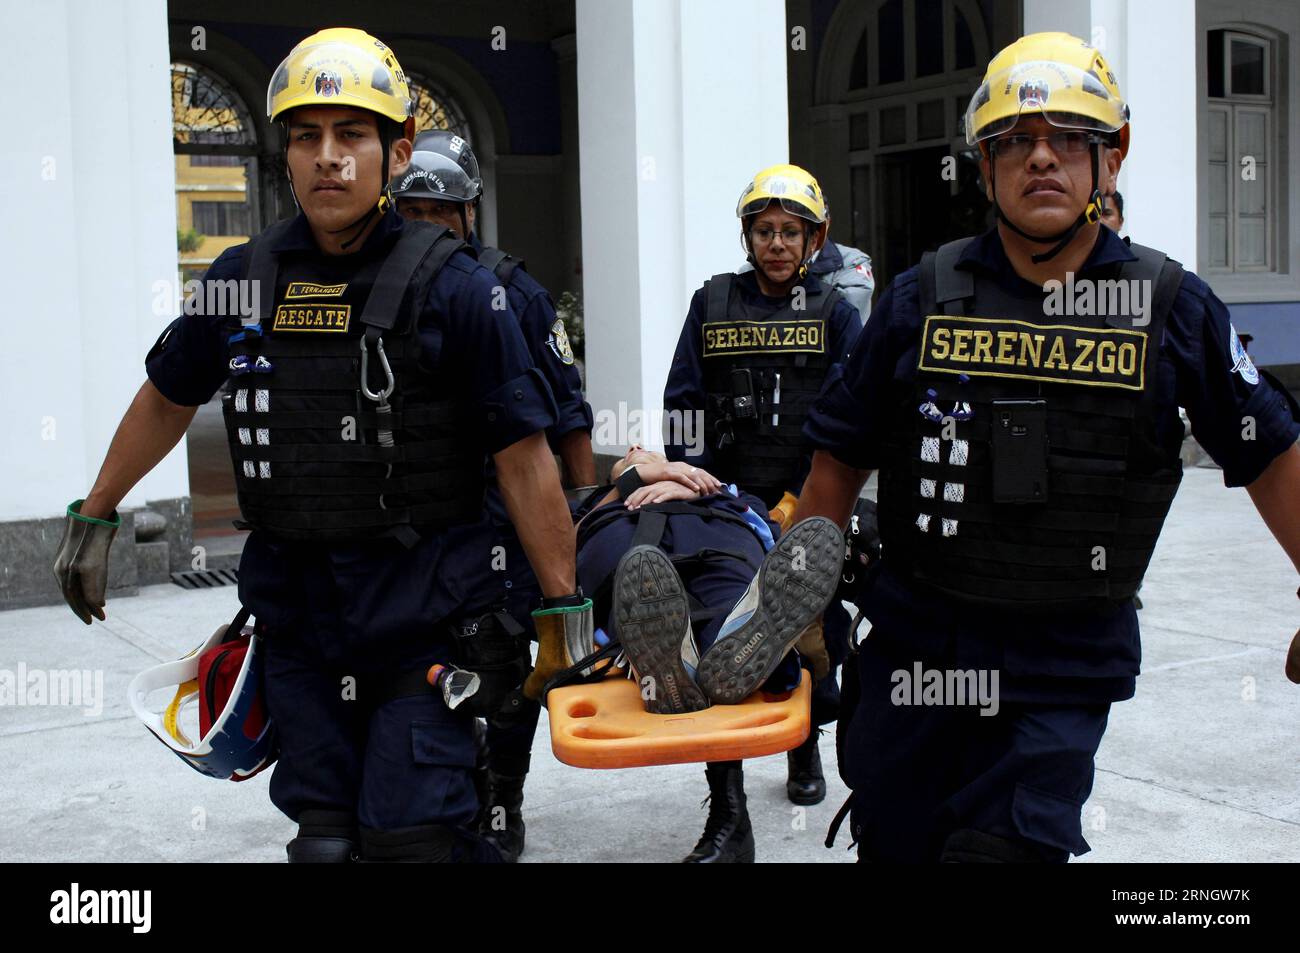 LIMA, Oct. 13, 2016 -- Members of the Serenazgo Rescue Brigade take part in the 4th National School Earthquake and Tsunami Drill, which is organized by the Education Ministry of Peru, in Lima, capital of Peru, on Oct. 13, 2016. ) (da) (fnc)(axy) PERU-LIMA-SECURITY-DRILL LuisxCamacho PUBLICATIONxNOTxINxCHN   Lima OCT 13 2016 Members of The SERENAZGO Rescue Brigade Take Part in The 4th National School Earthquake and Tsunami Drill Which IS Organized by The Education Ministry of Peru in Lima Capital of Peru ON OCT 13 2016 there FNC axy Peru Lima Security Drill LuisxCamacho PUBLICATIONxNOTxINxCHN Stock Photo